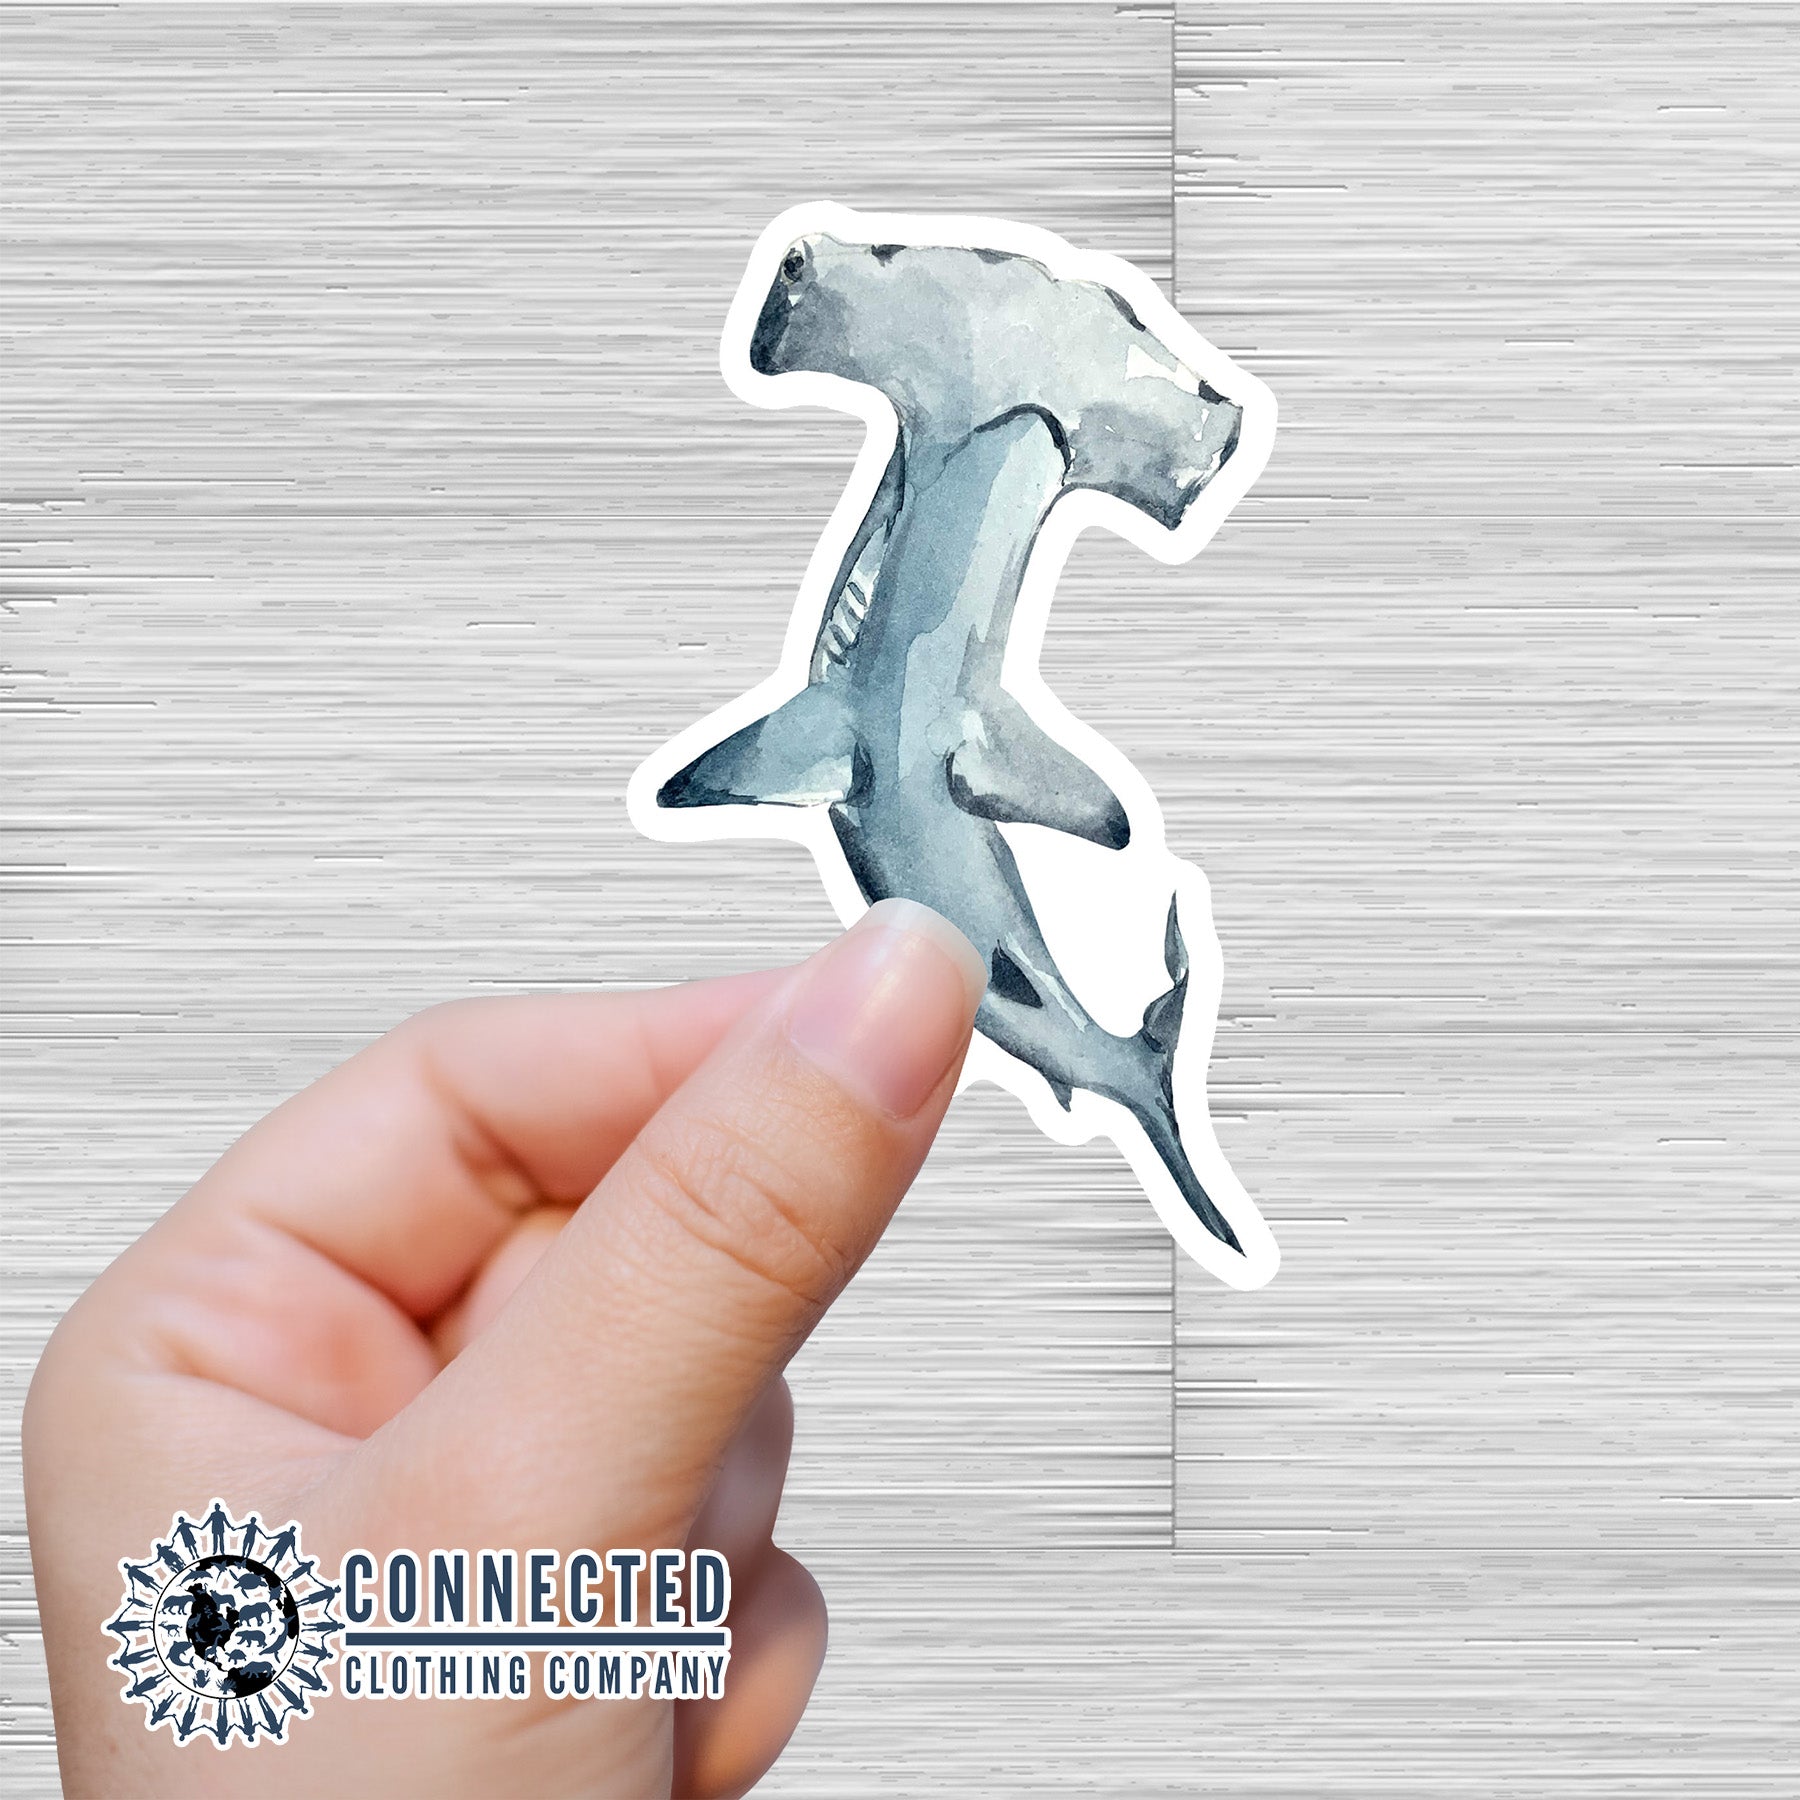 Hand Holding Hammerhead Shark Watercolor Sticker - Connected Clothing Company - Ethical and Sustainable Apparel - portion of profits donated to shark conservation